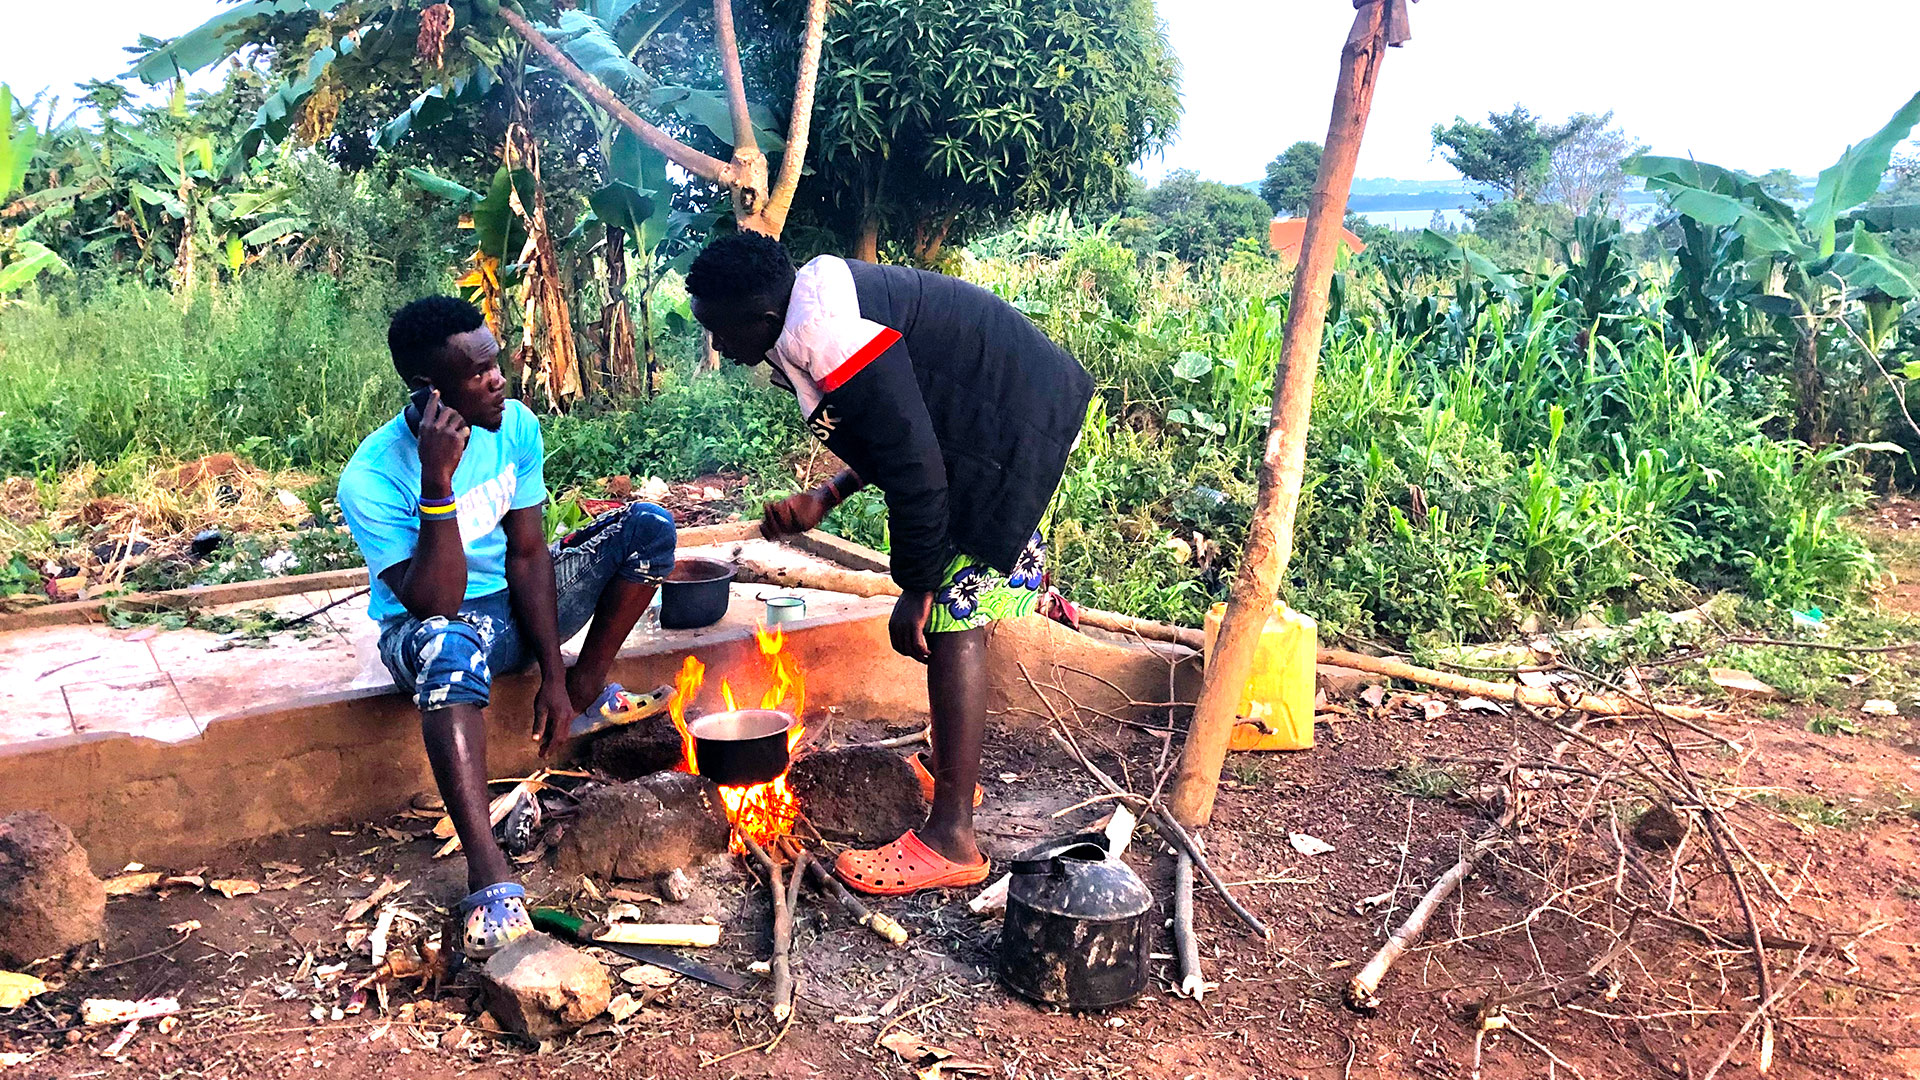 Cooking posho over a fire in Uganda